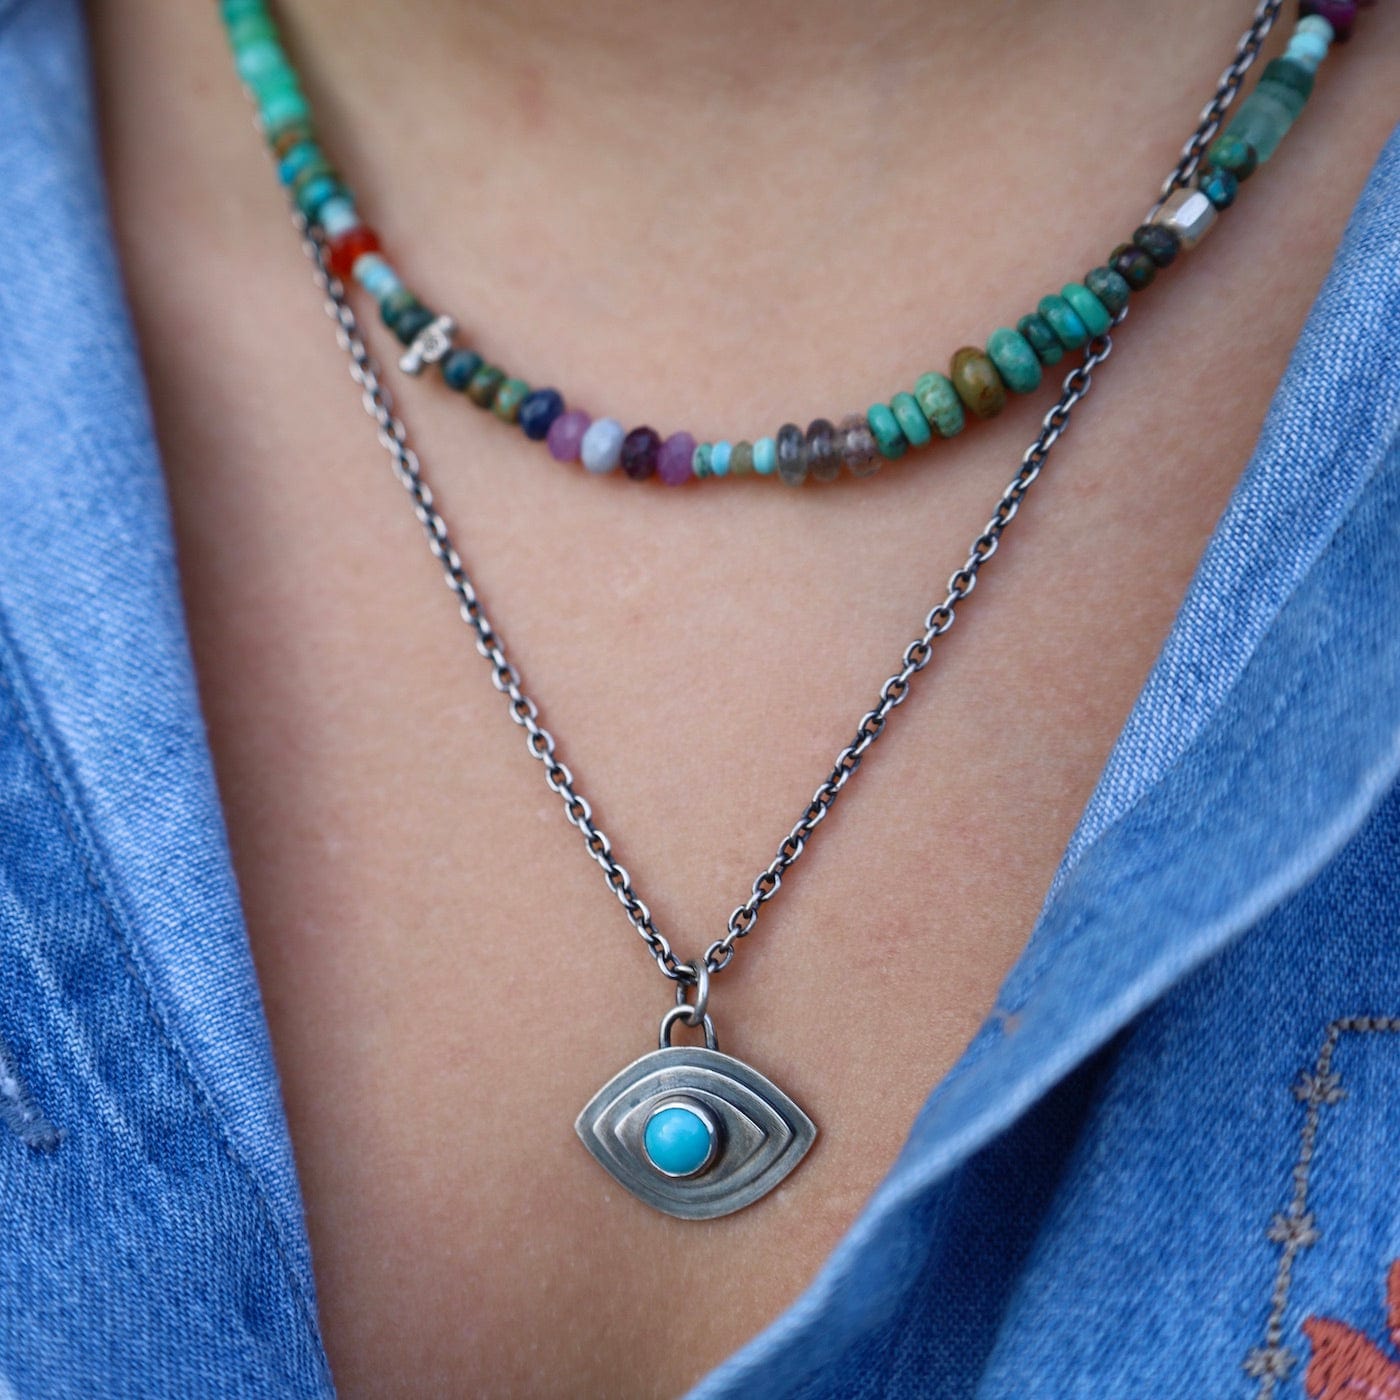 NKL Turquoise Inner Vision Necklace